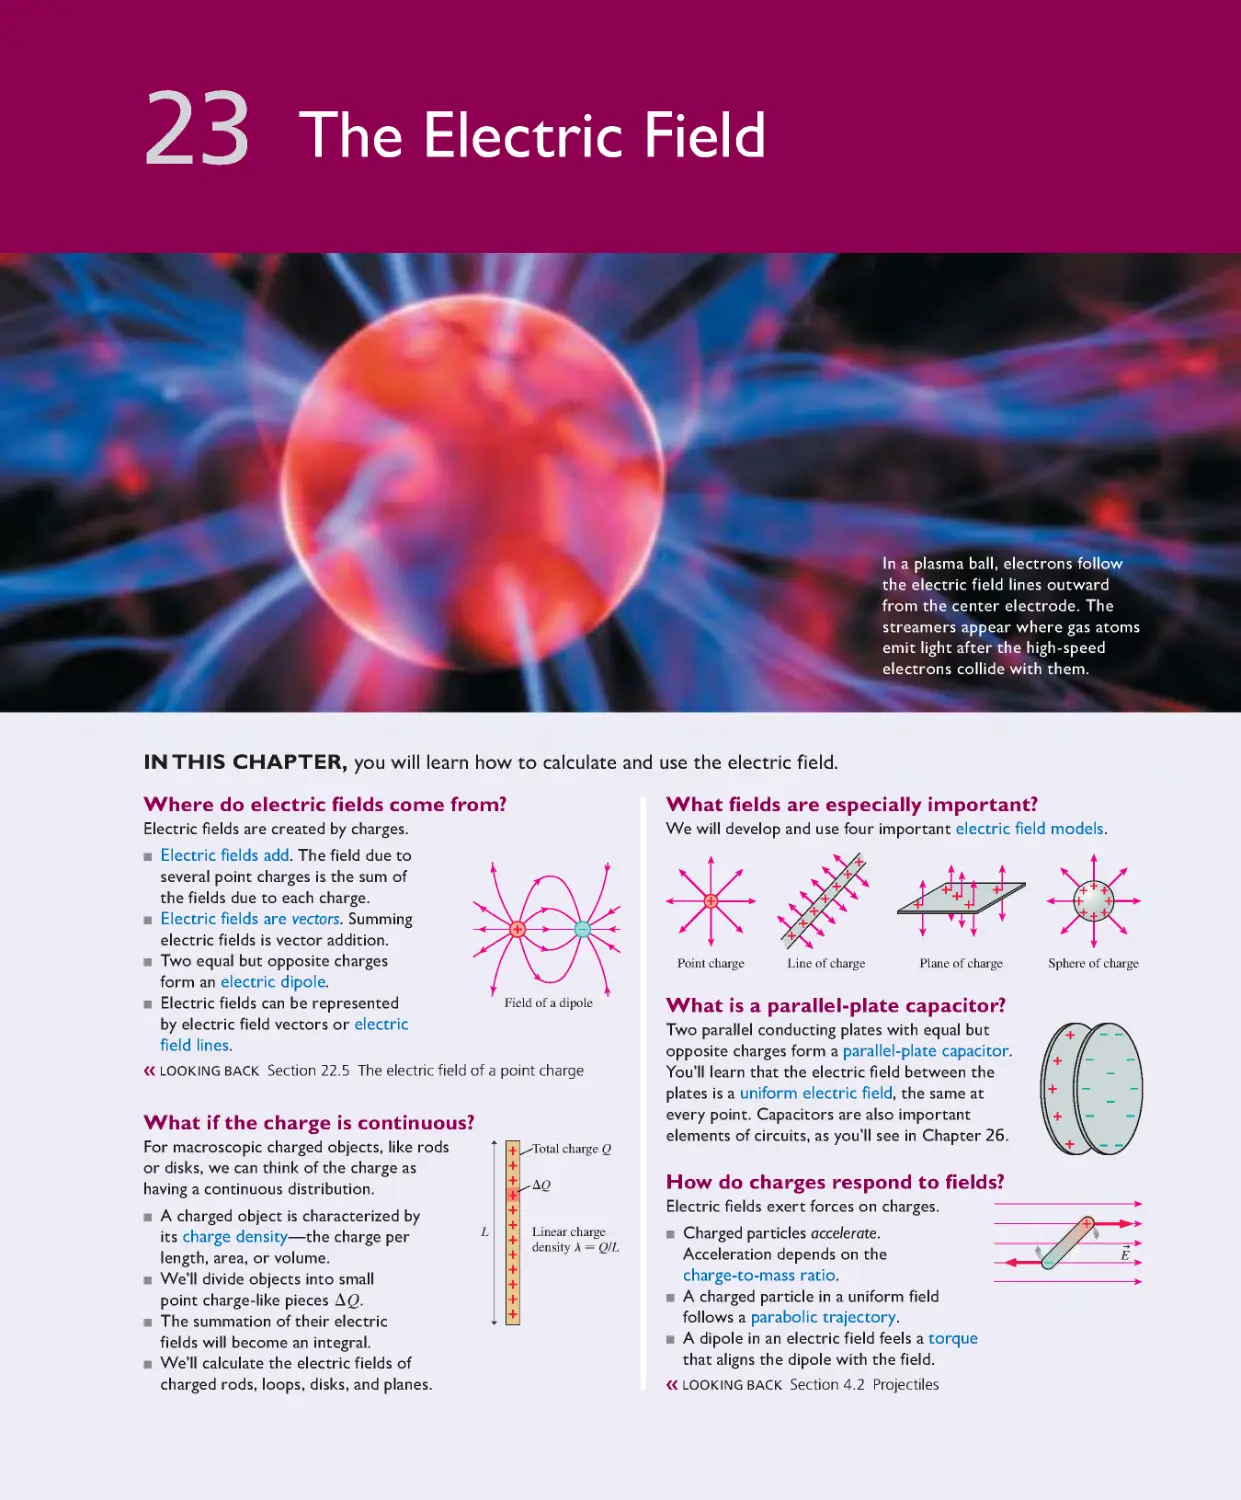 Chapter 23: The Electric Field